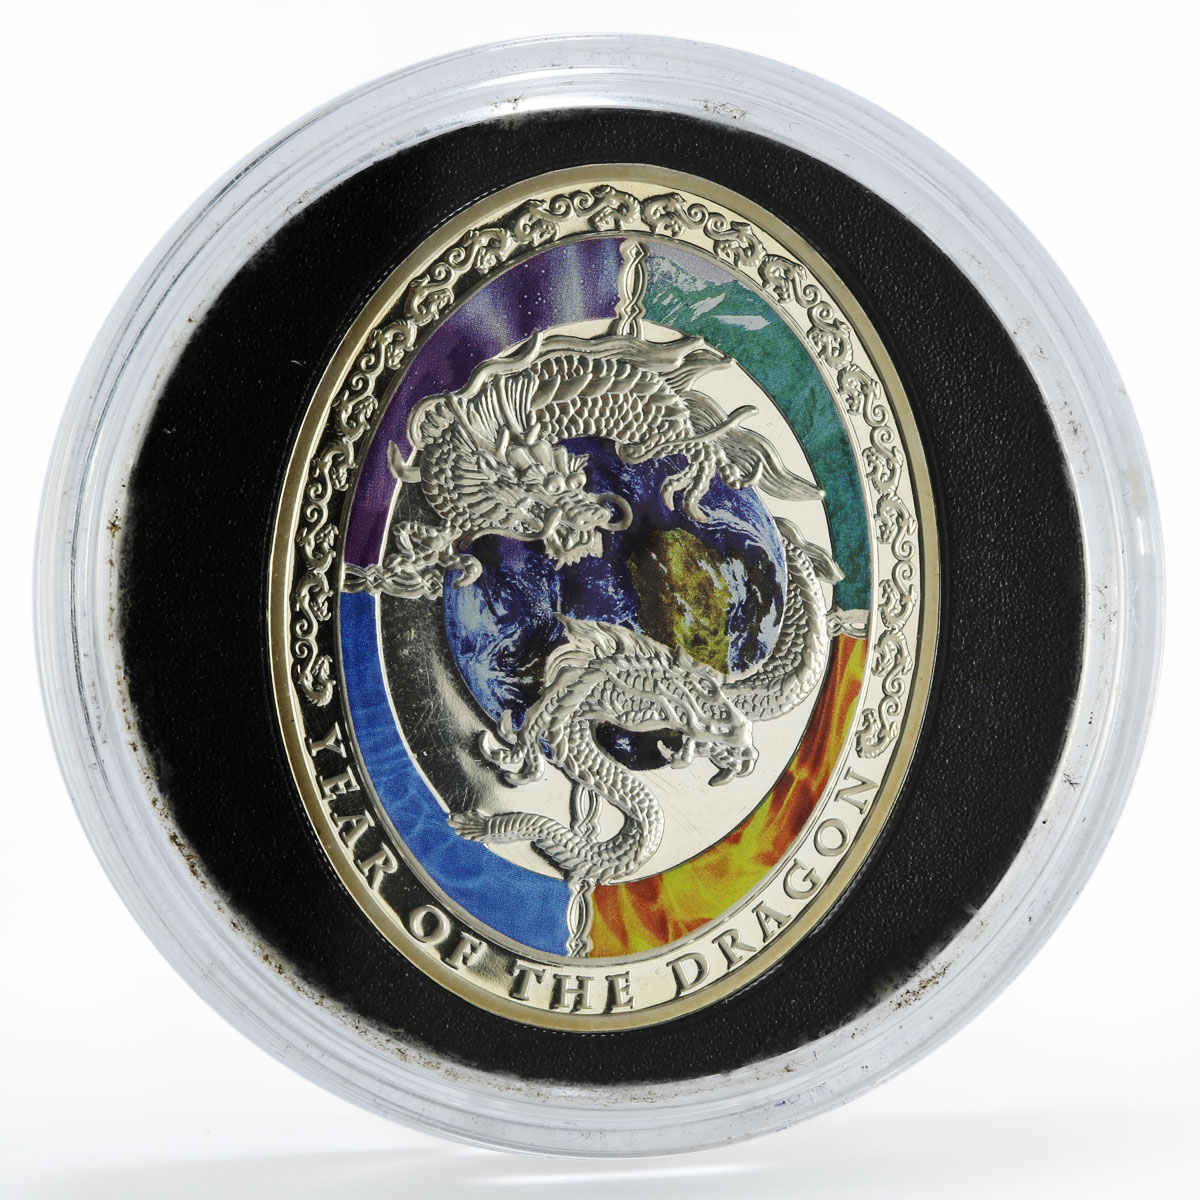 Niue 1 dollar Year of the Dragon Earth Elements colored silver coin 2012